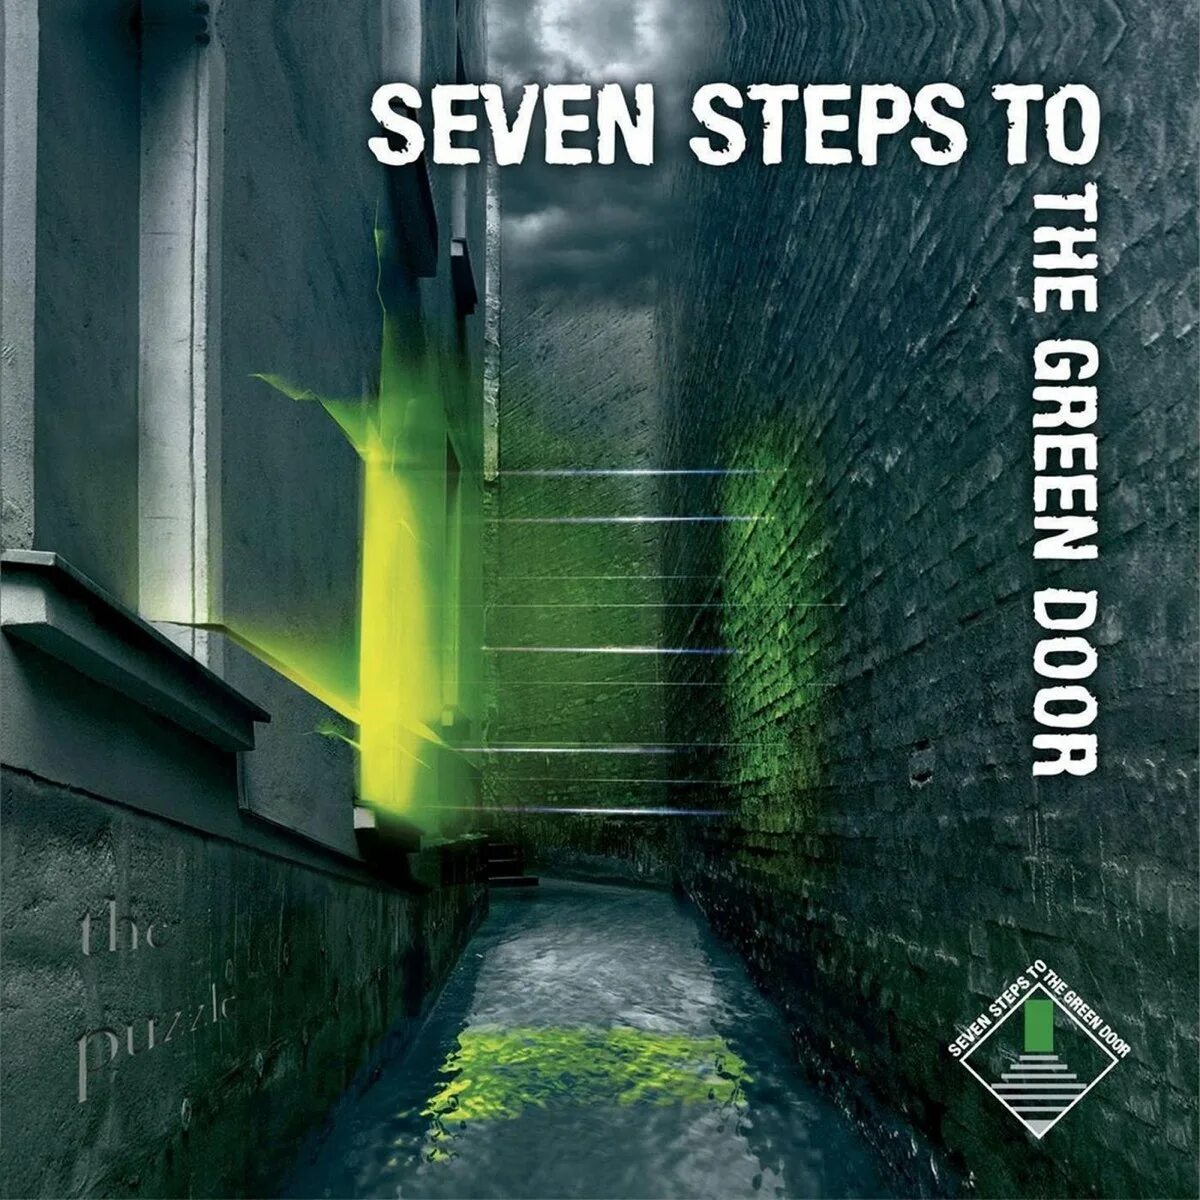 Seven steps. Севен степс. The 7 steps to. 2020 - Vertex & creator - Seven steps.